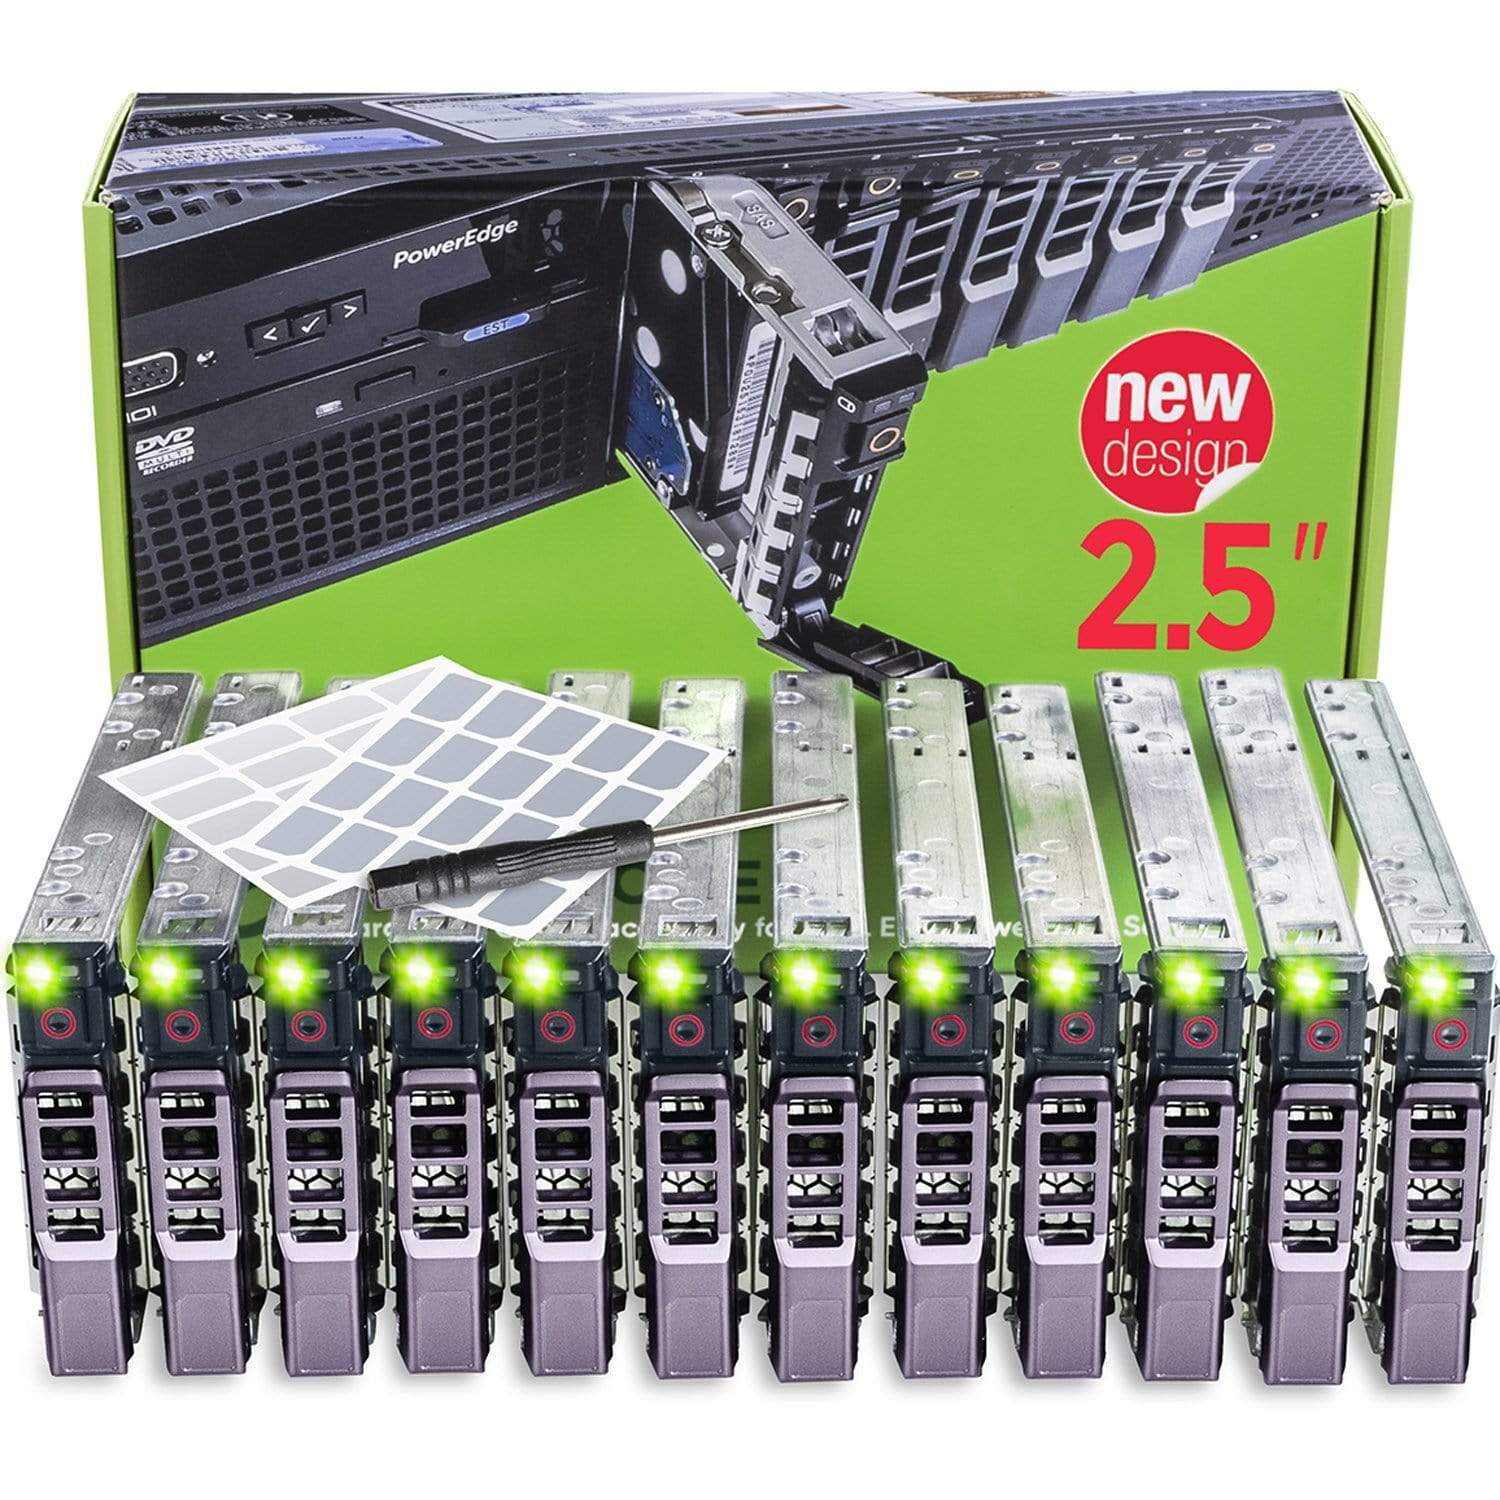 WORKDONE 12 Pack 2.5-inch Hard Drive Caddy for Dell PowerEdge Servers